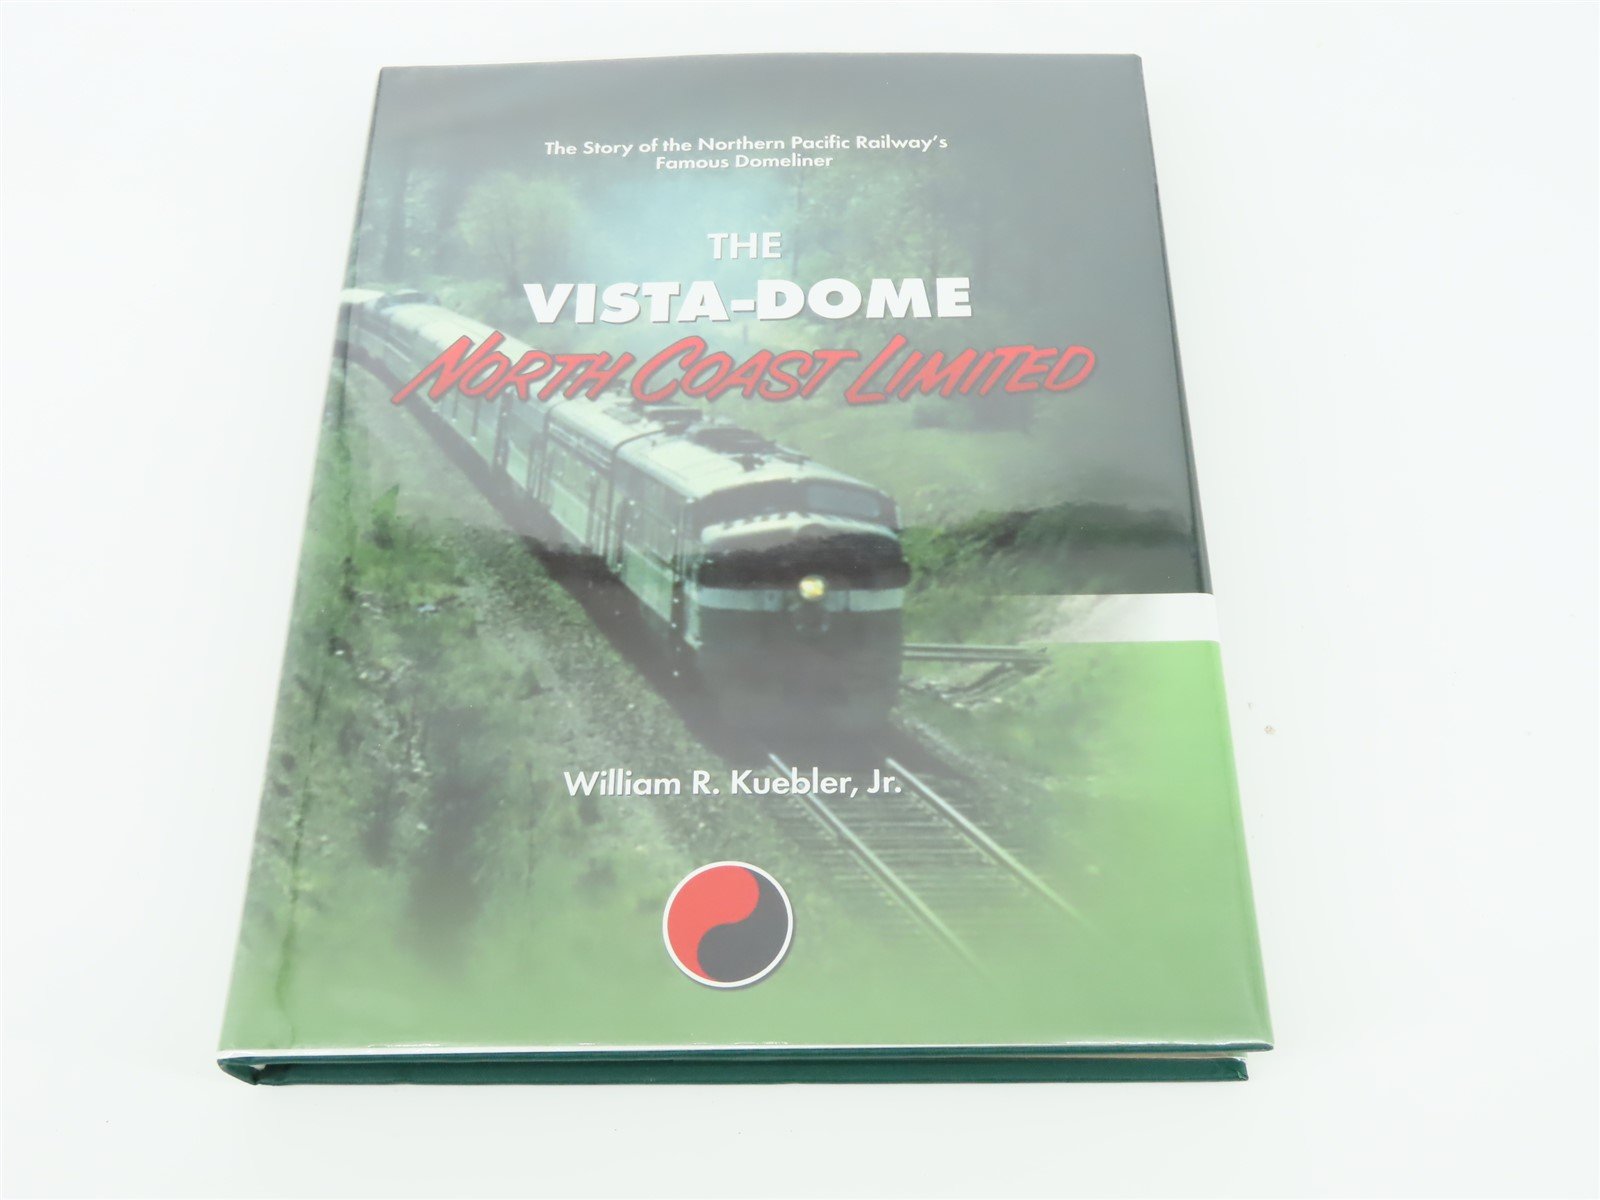 The Vista-Dome North Coast Limited by William R. Kuebler, Jr. ©2004 HC Book